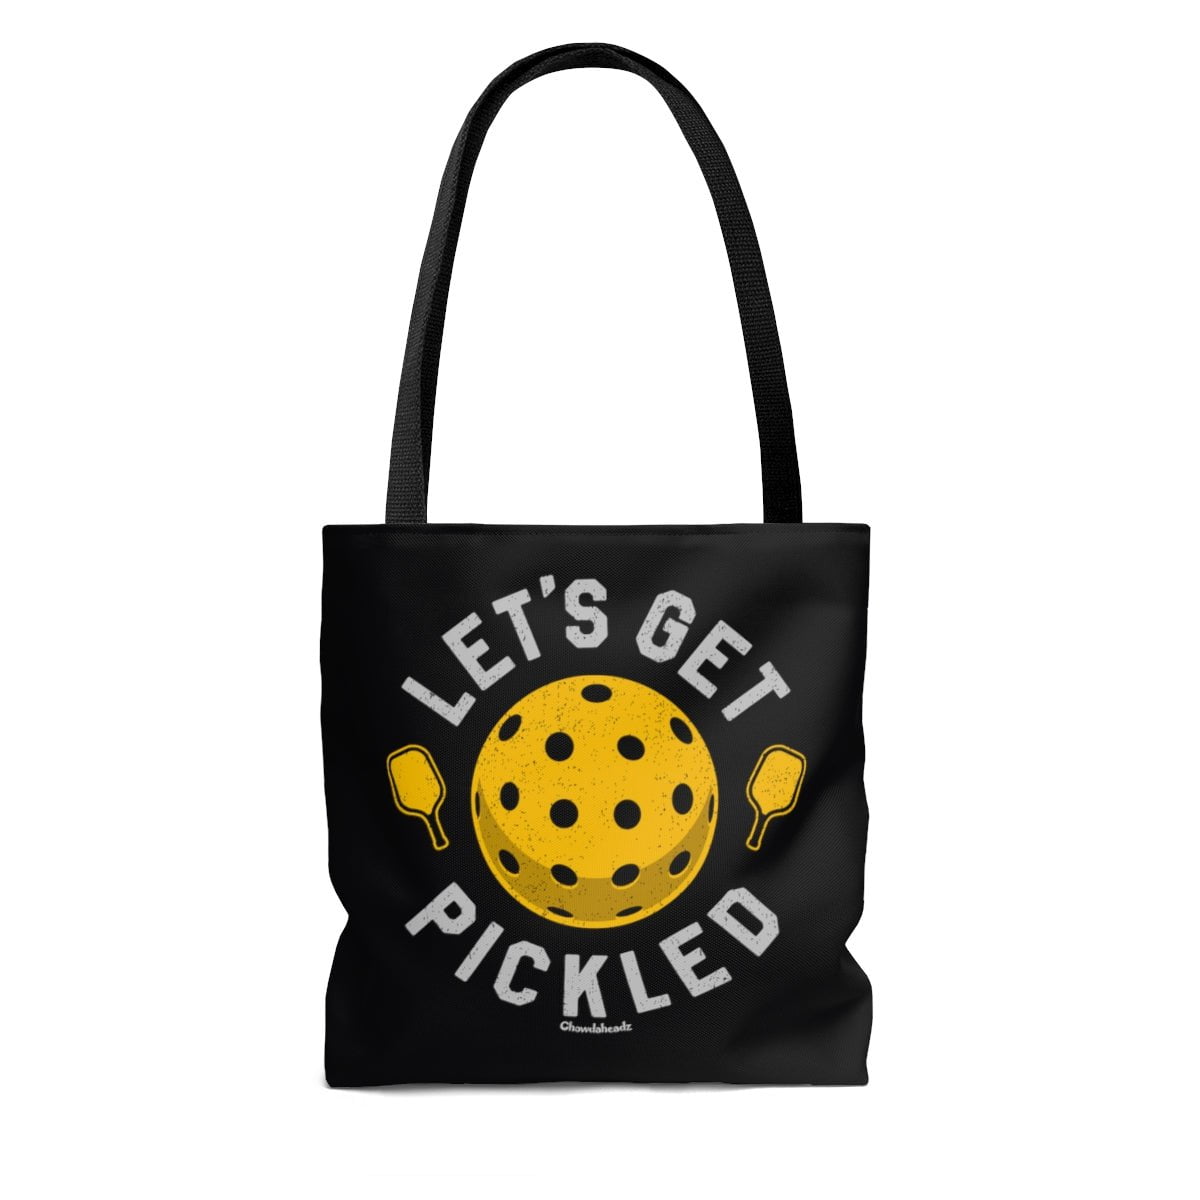 Let's Get Pickled Tote Bag - Chowdaheadz